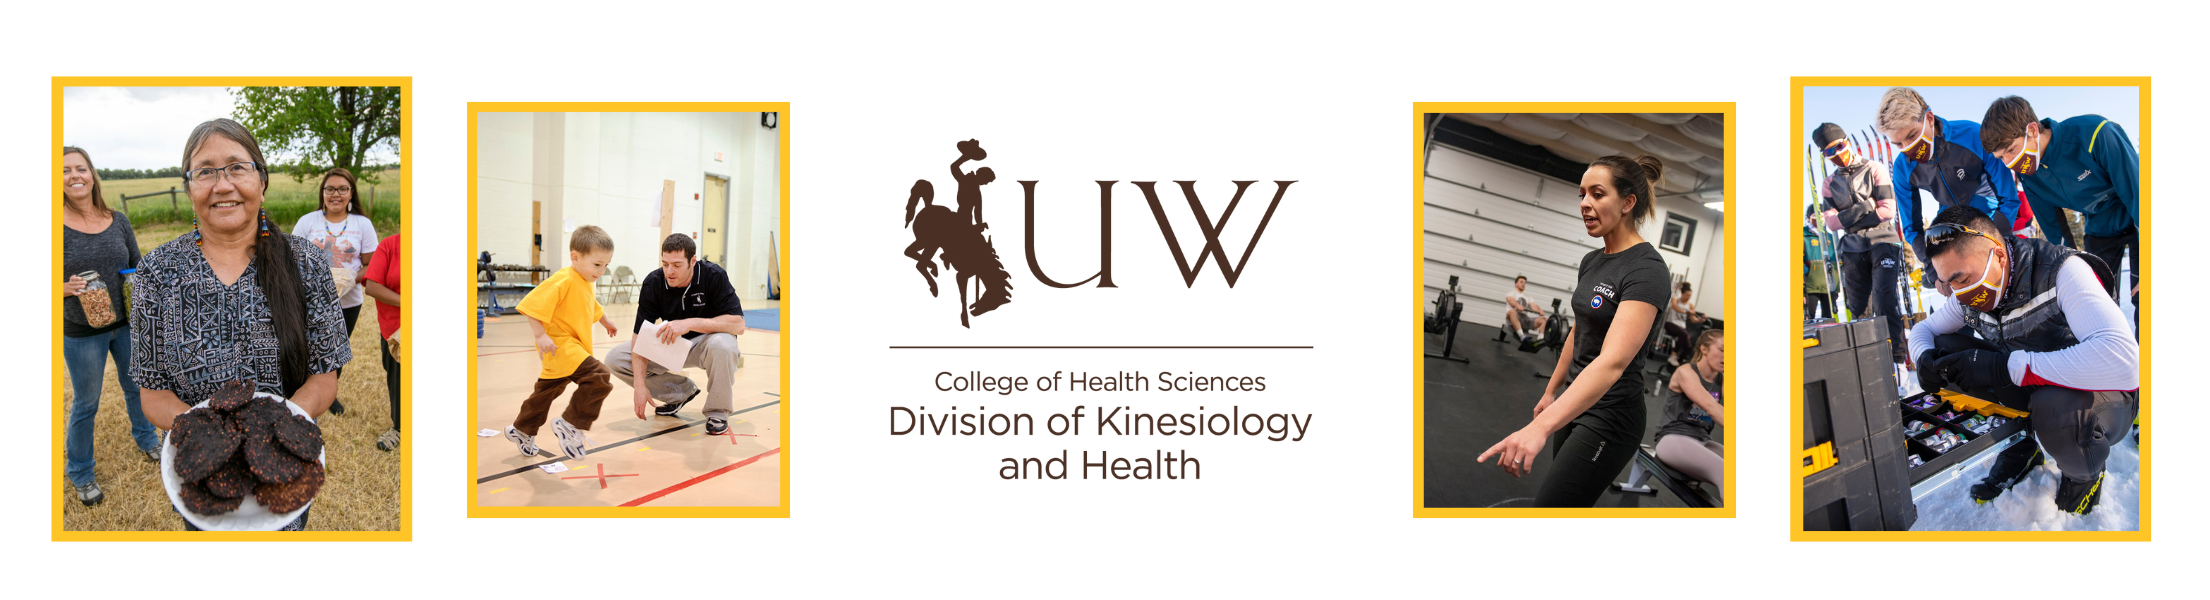 Students from the UW Division of Kinesiology and Health